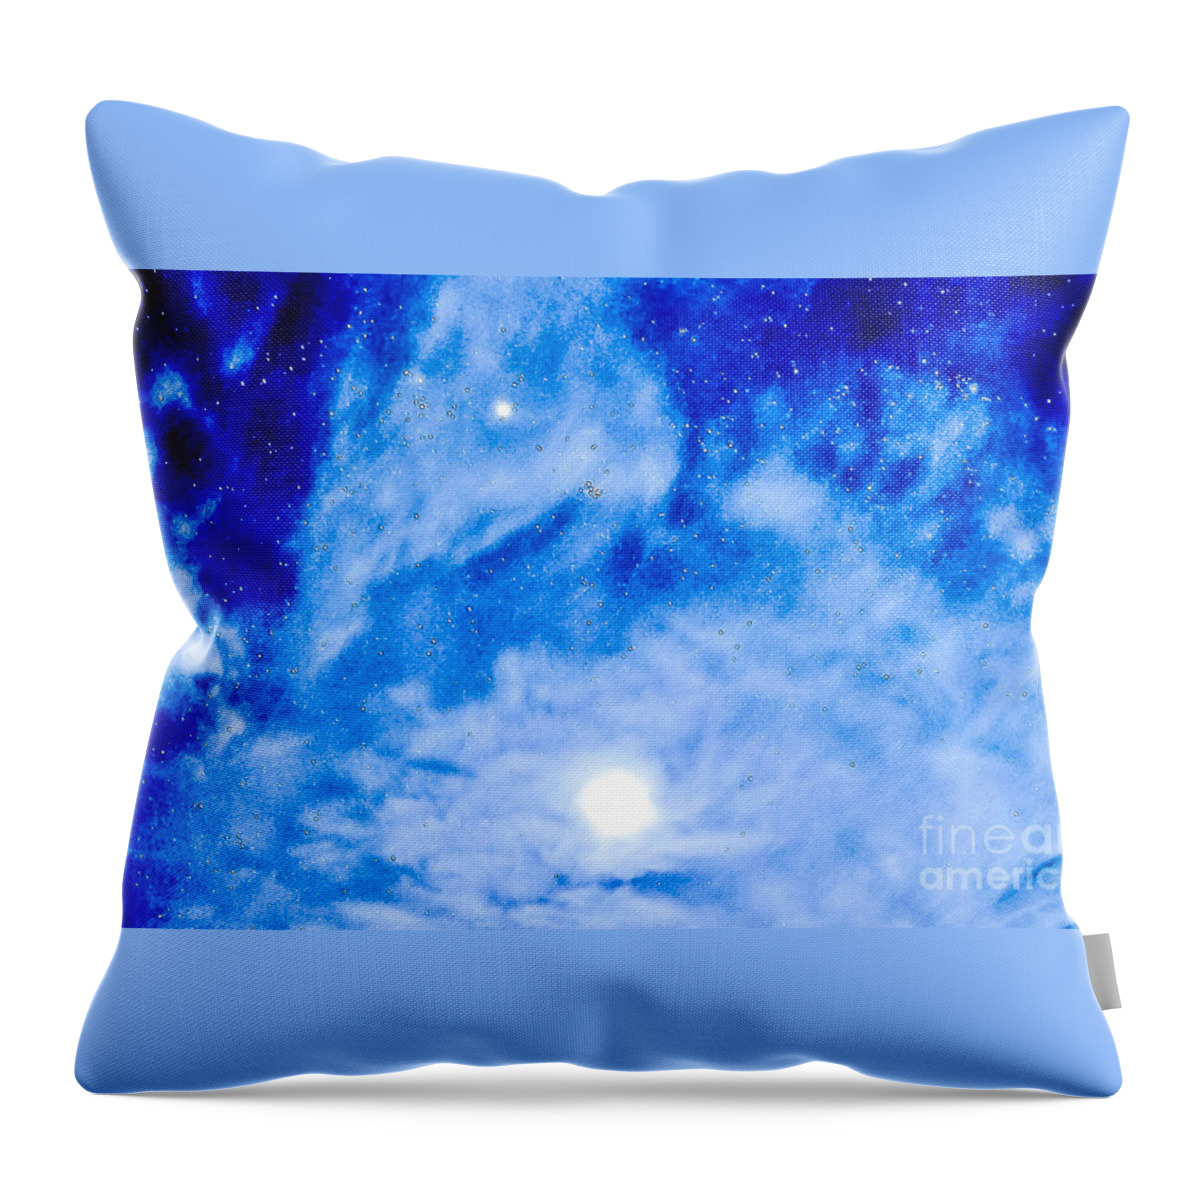 Blue Throw Pillow featuring the photograph ChiLLY NiGHT by Angela J Wright